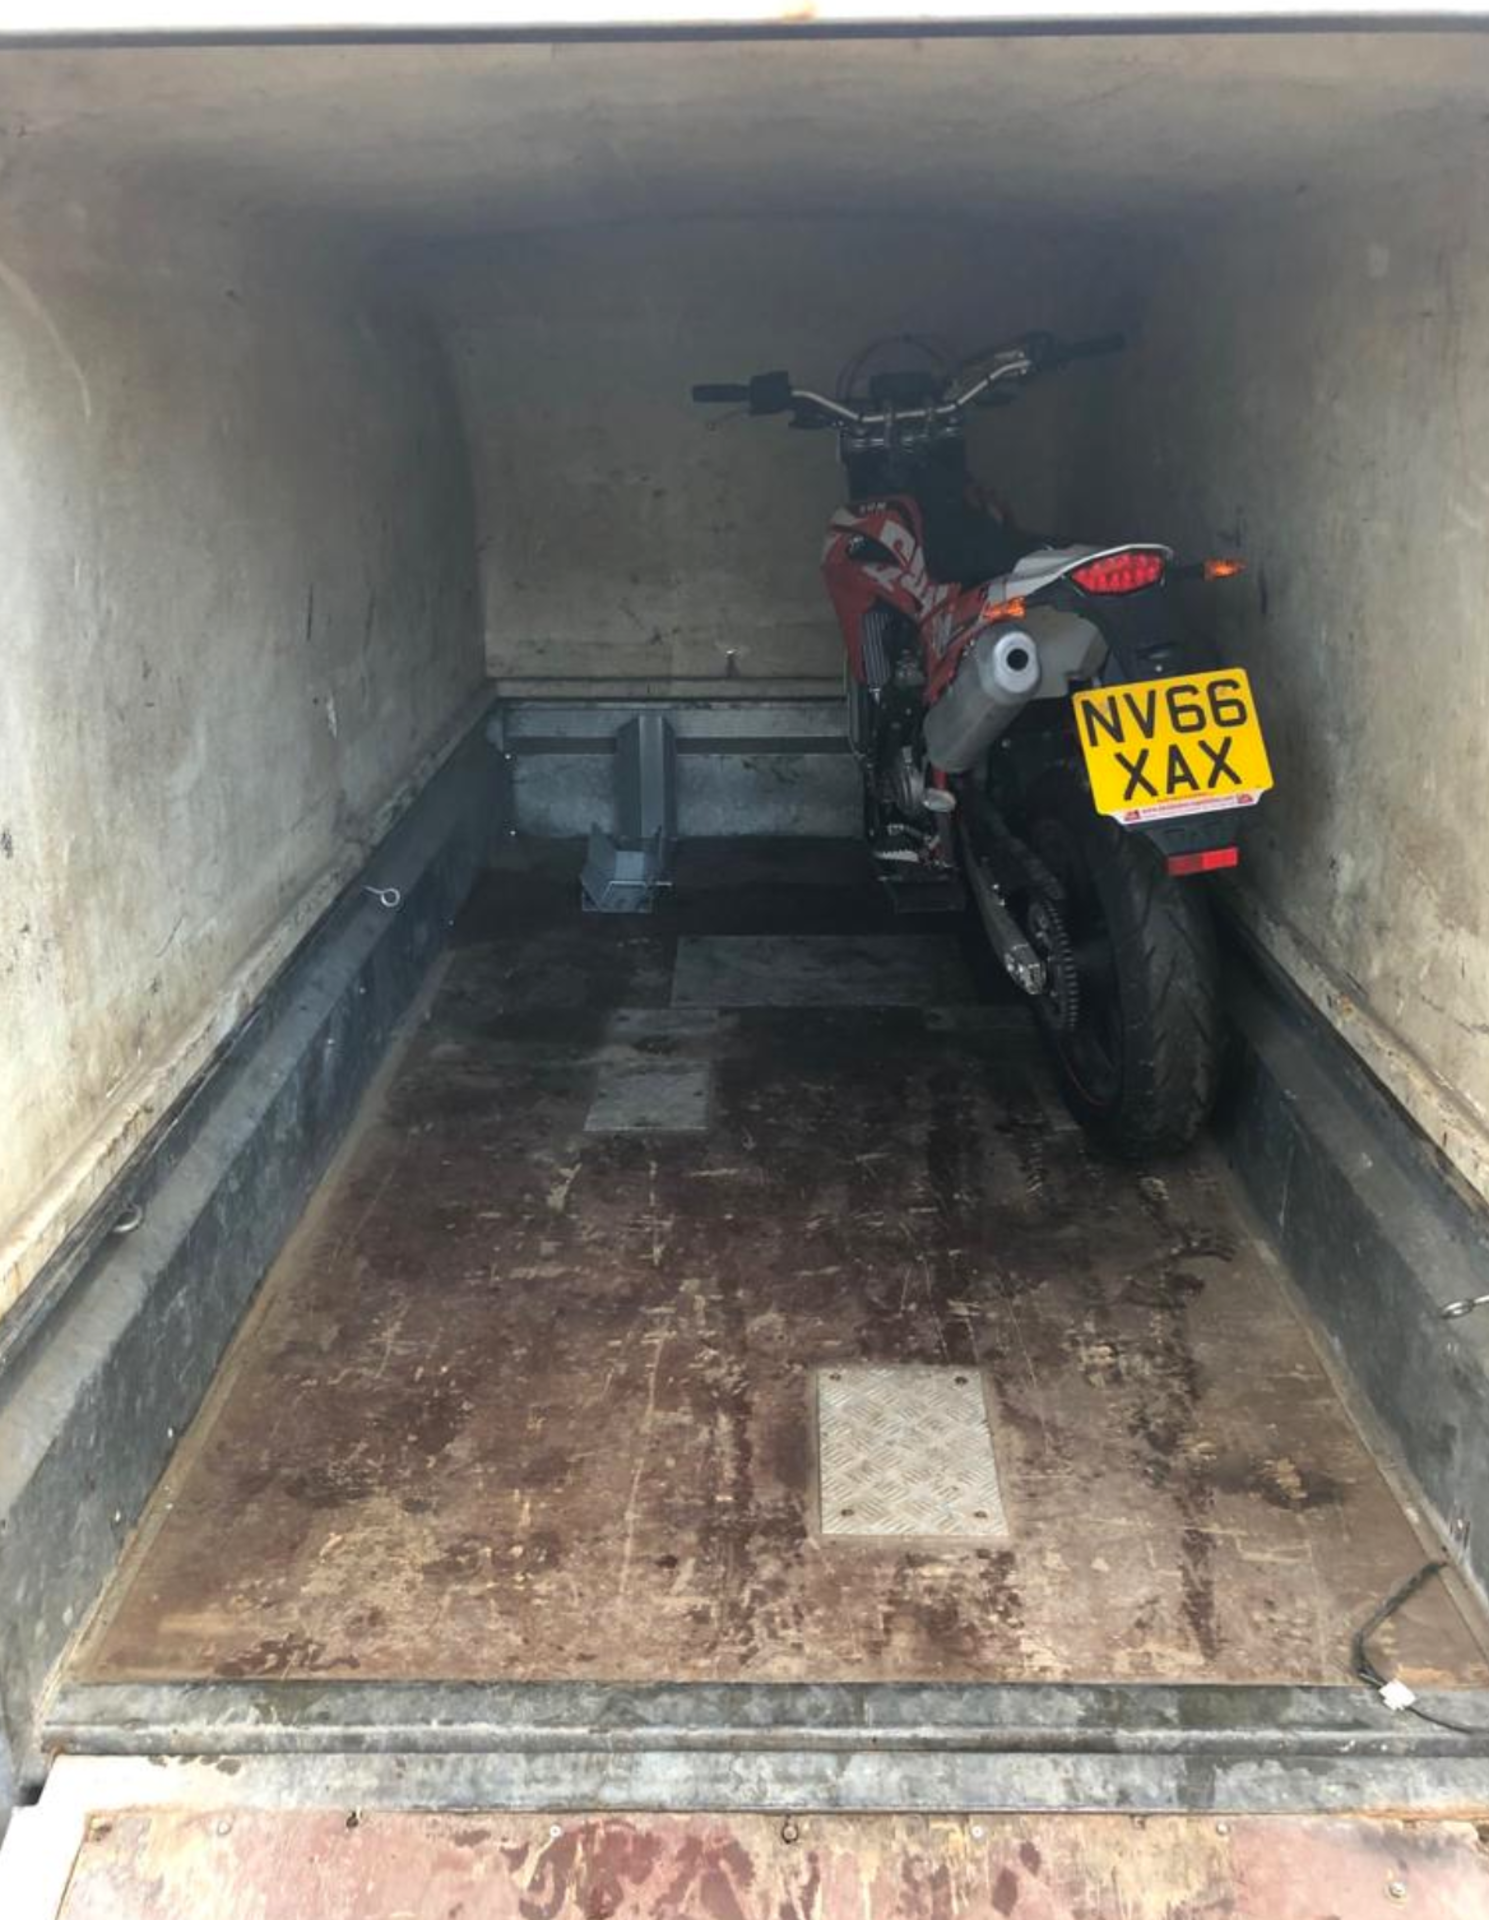 SPECIALIST SINGLE AXLE TOWABLE MOTORBIKE TRANSPORT COVERED TRAILER RAMP *PLUS VAT* - £1500 RESERVE! - Image 5 of 8